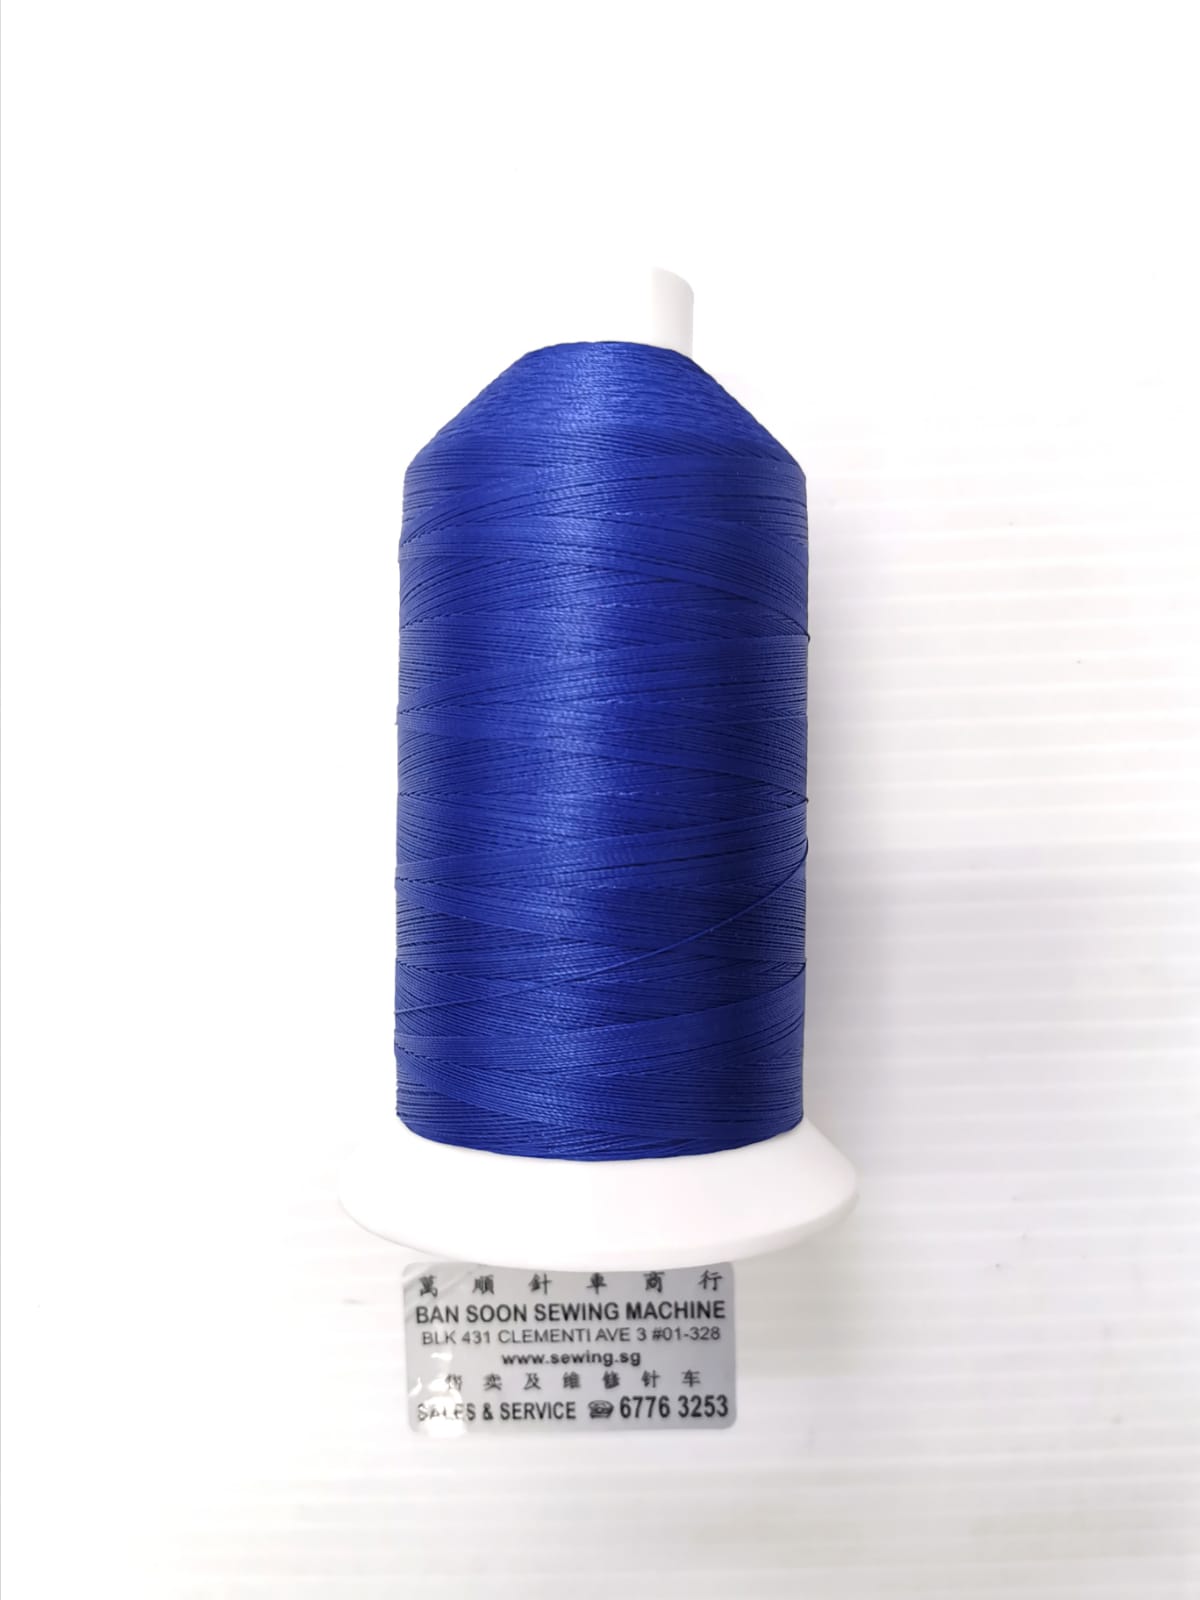 OUTDOOR SEWING THREADS, UV Resistance sewing thread. Specially produced for Shelters, Awnings and all outdoor sewing applications. SERABOND 30 V92 Royal Blue